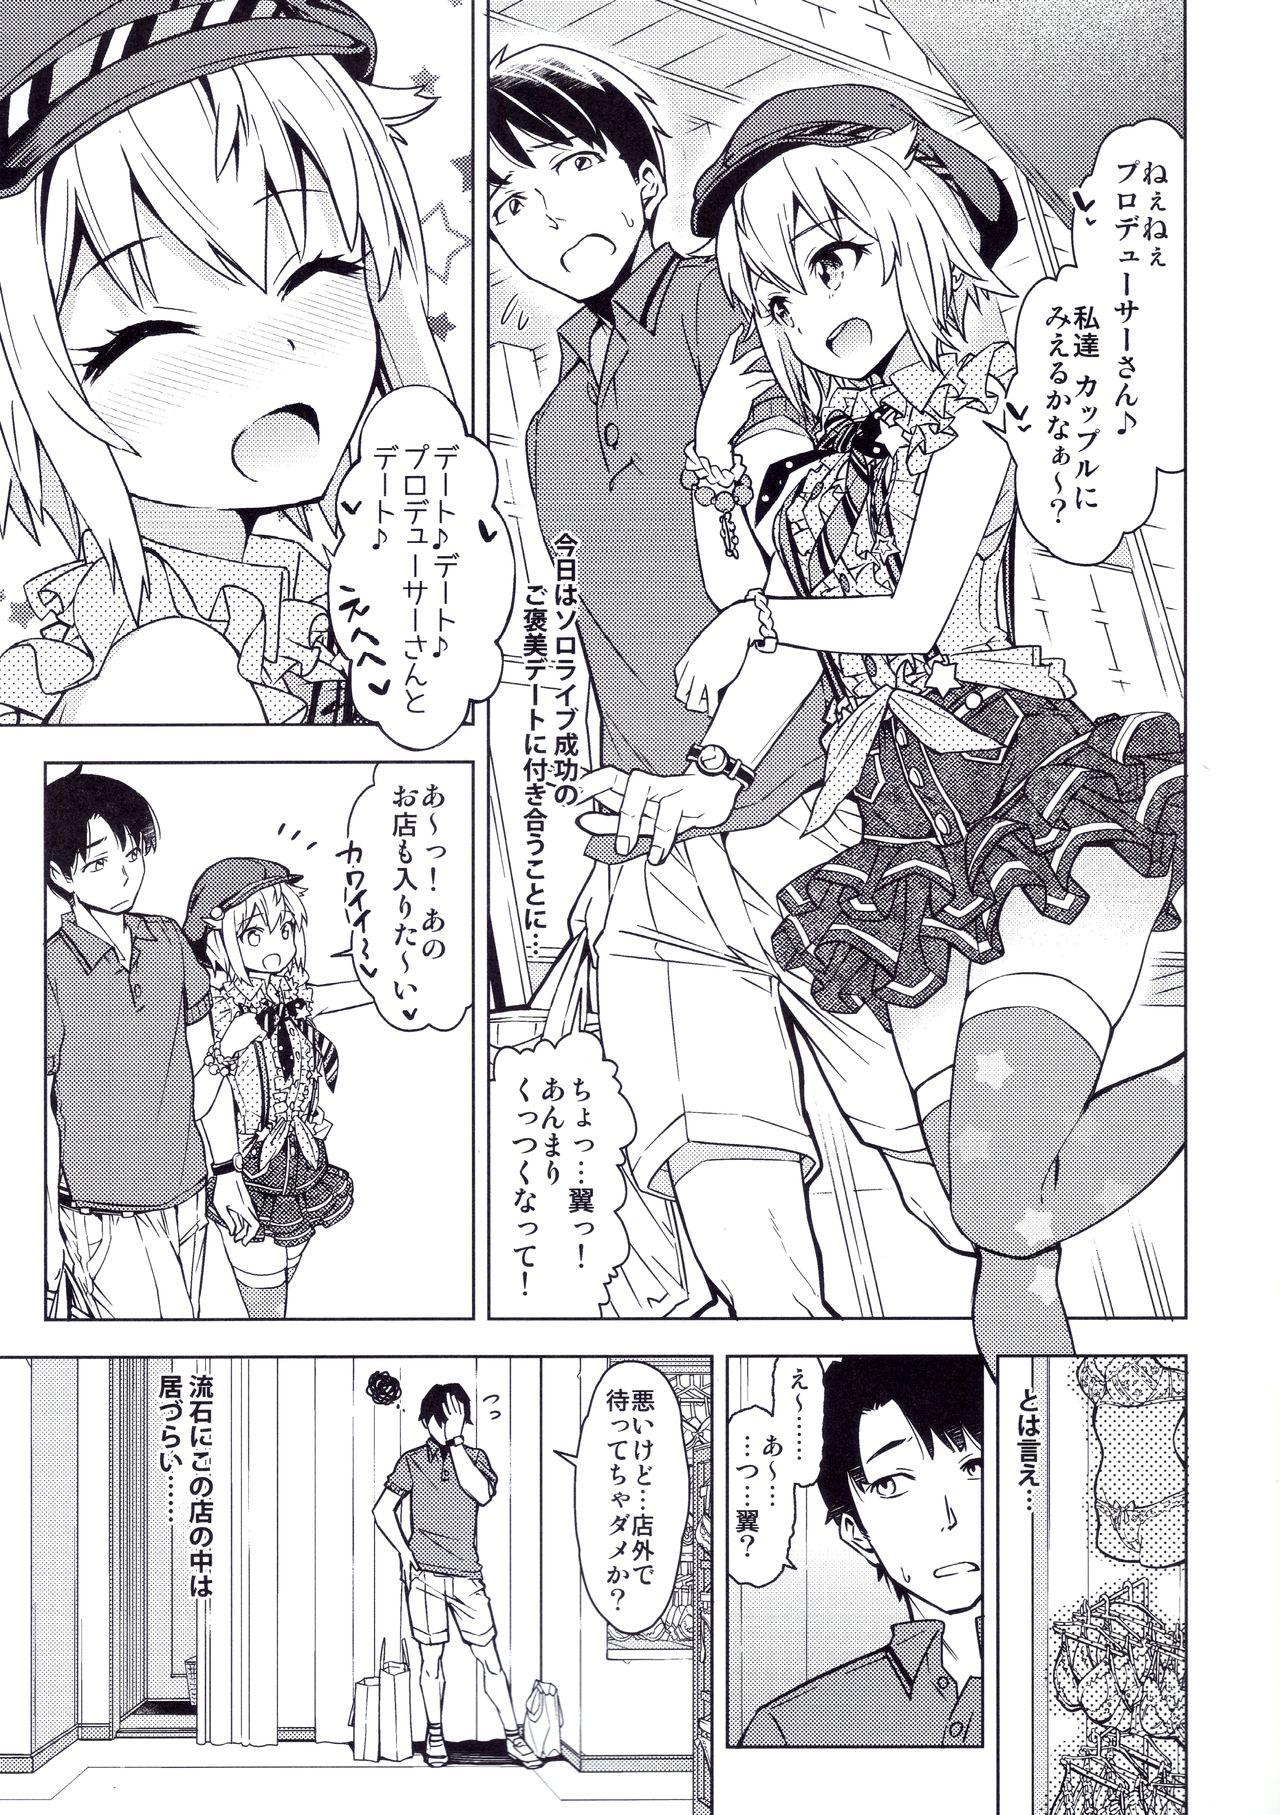 Sesso ...Dame? - The idolmaster Bitch - Page 2